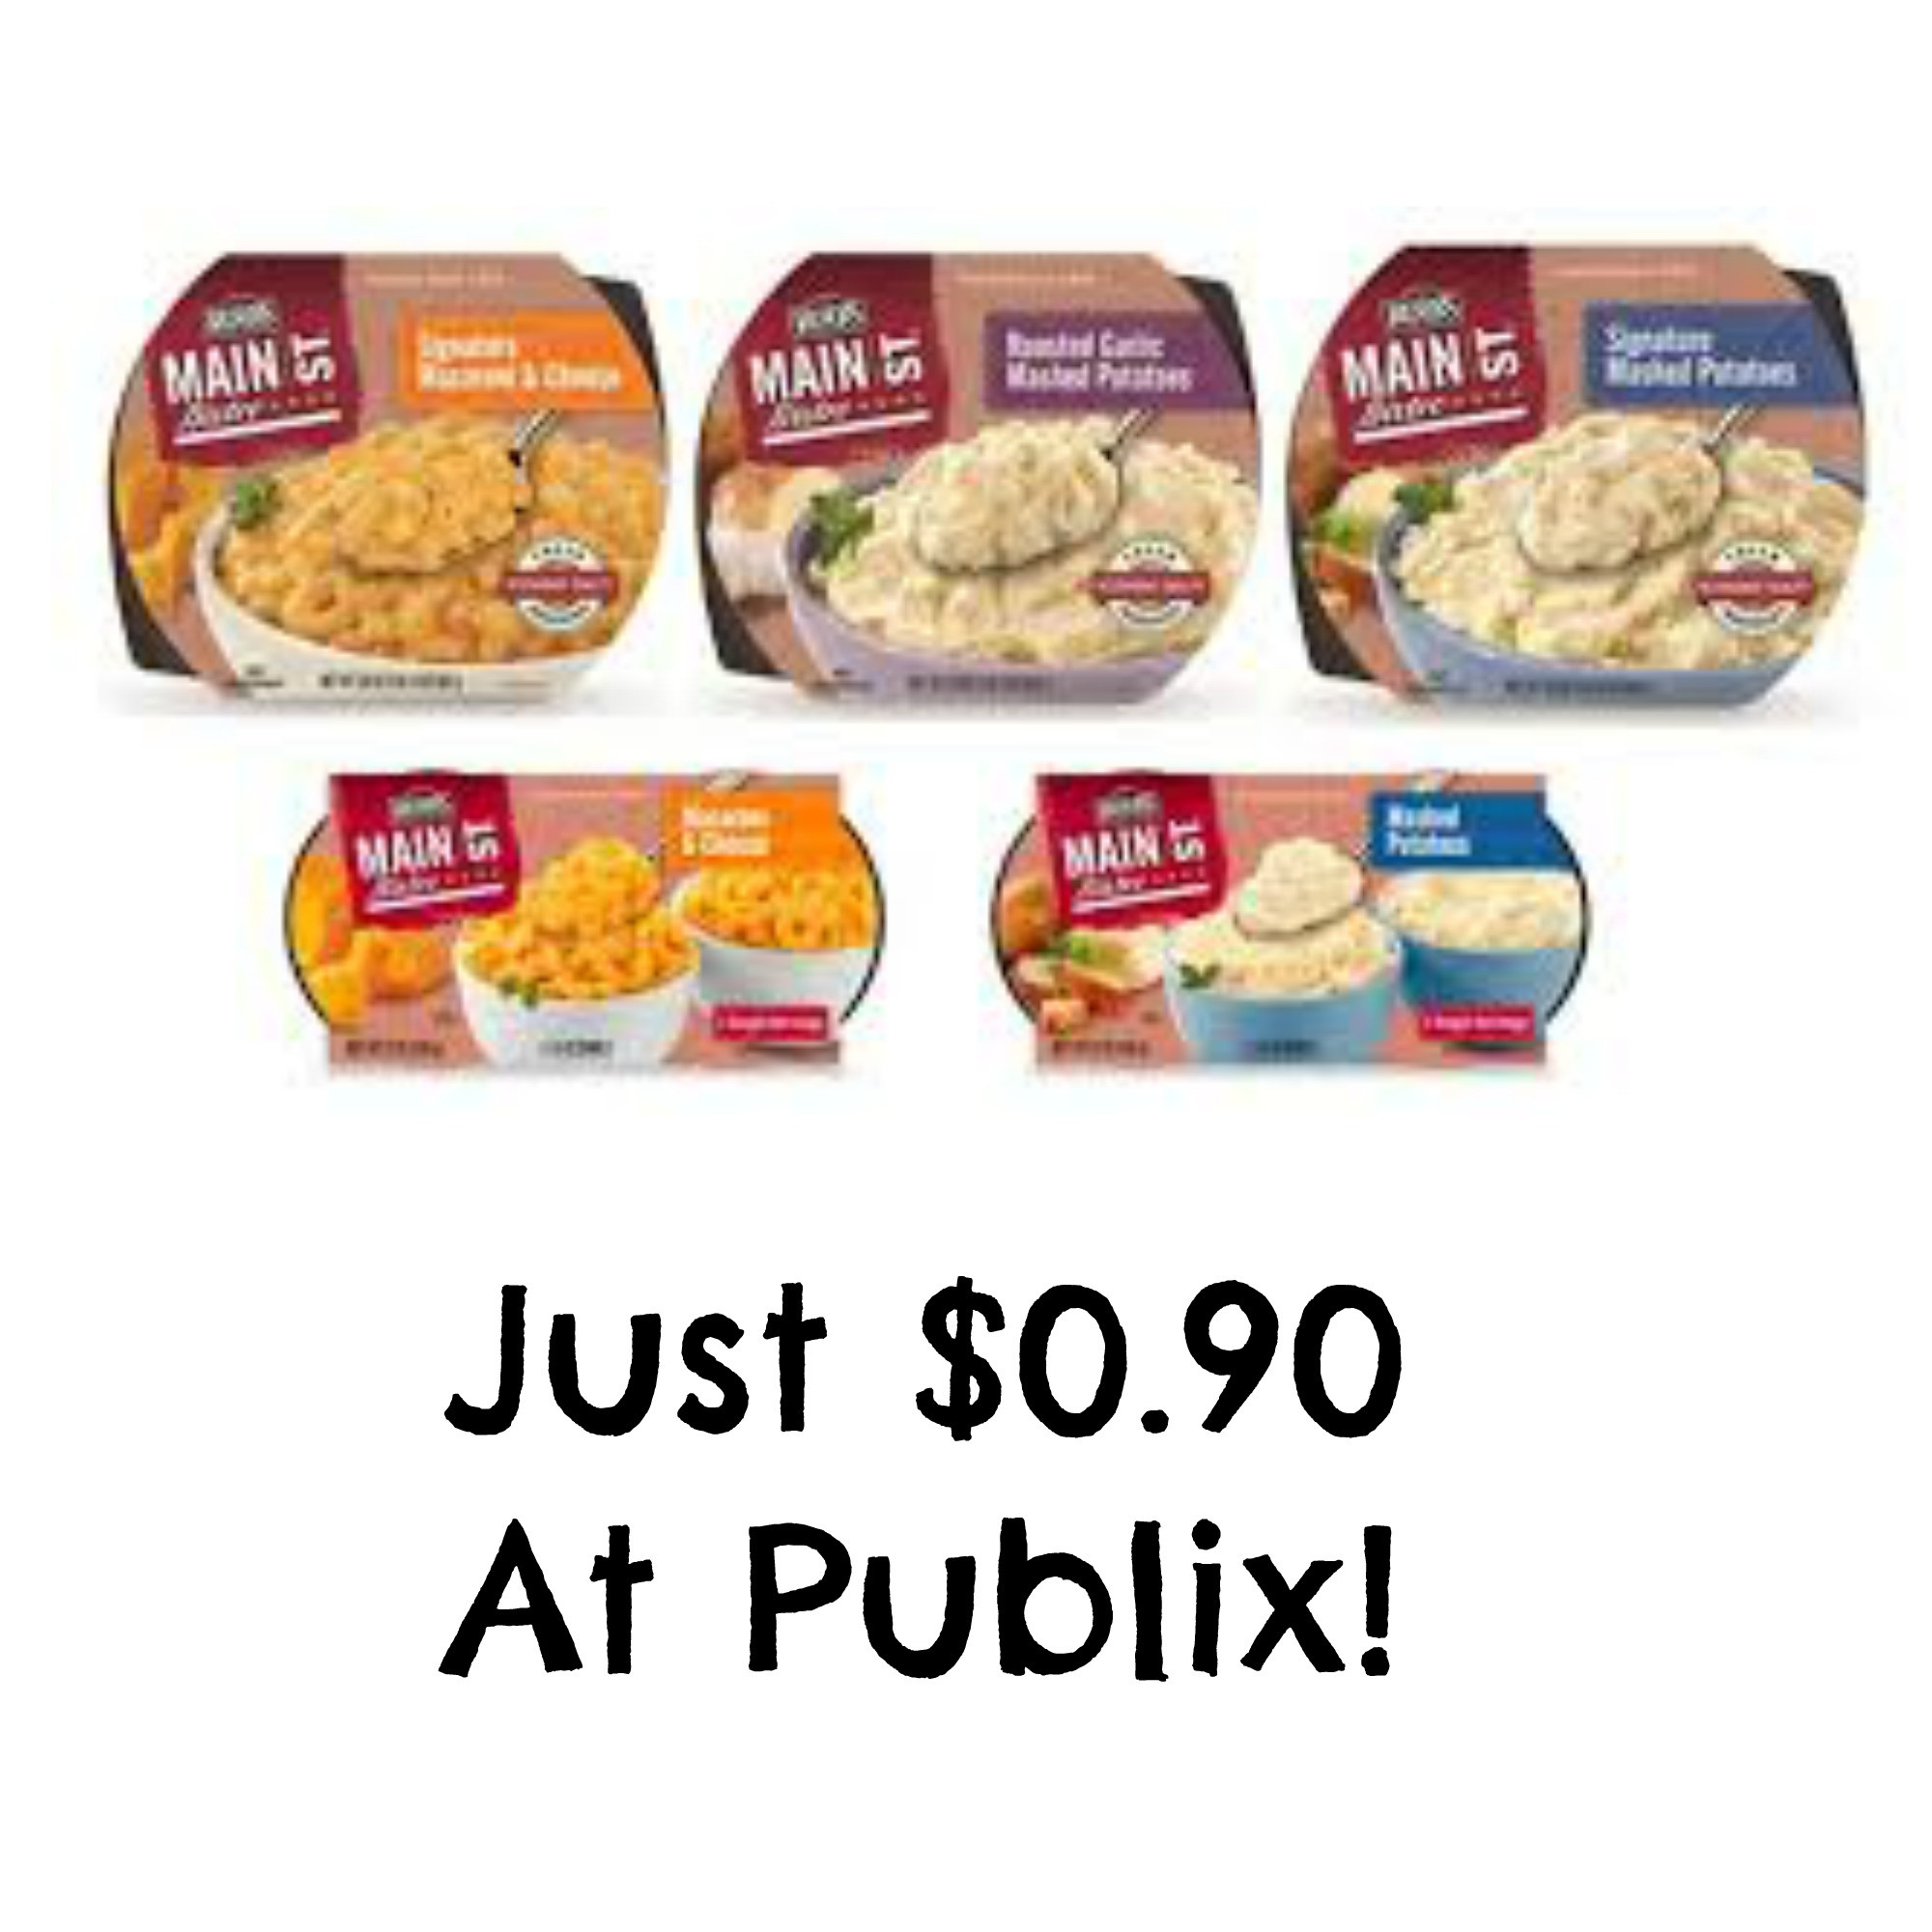 Publix Thanksgiving Dinner
 Reser’s Side Dishes Just $0 90 At Publix